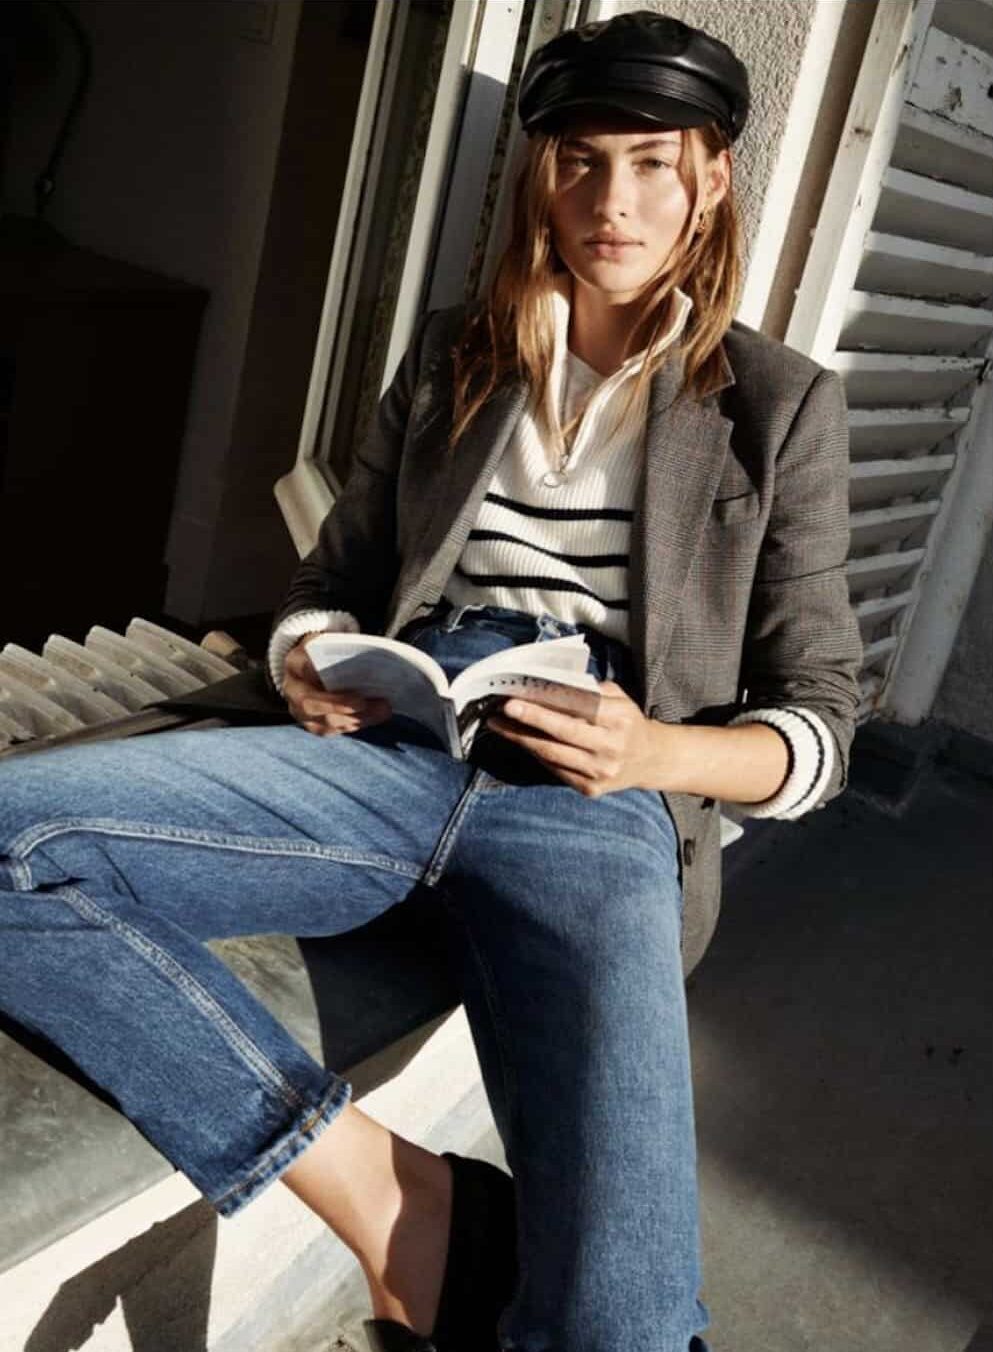 image of a woman in a blazer, striped knit sweater, and jeans leaning on a windowsill